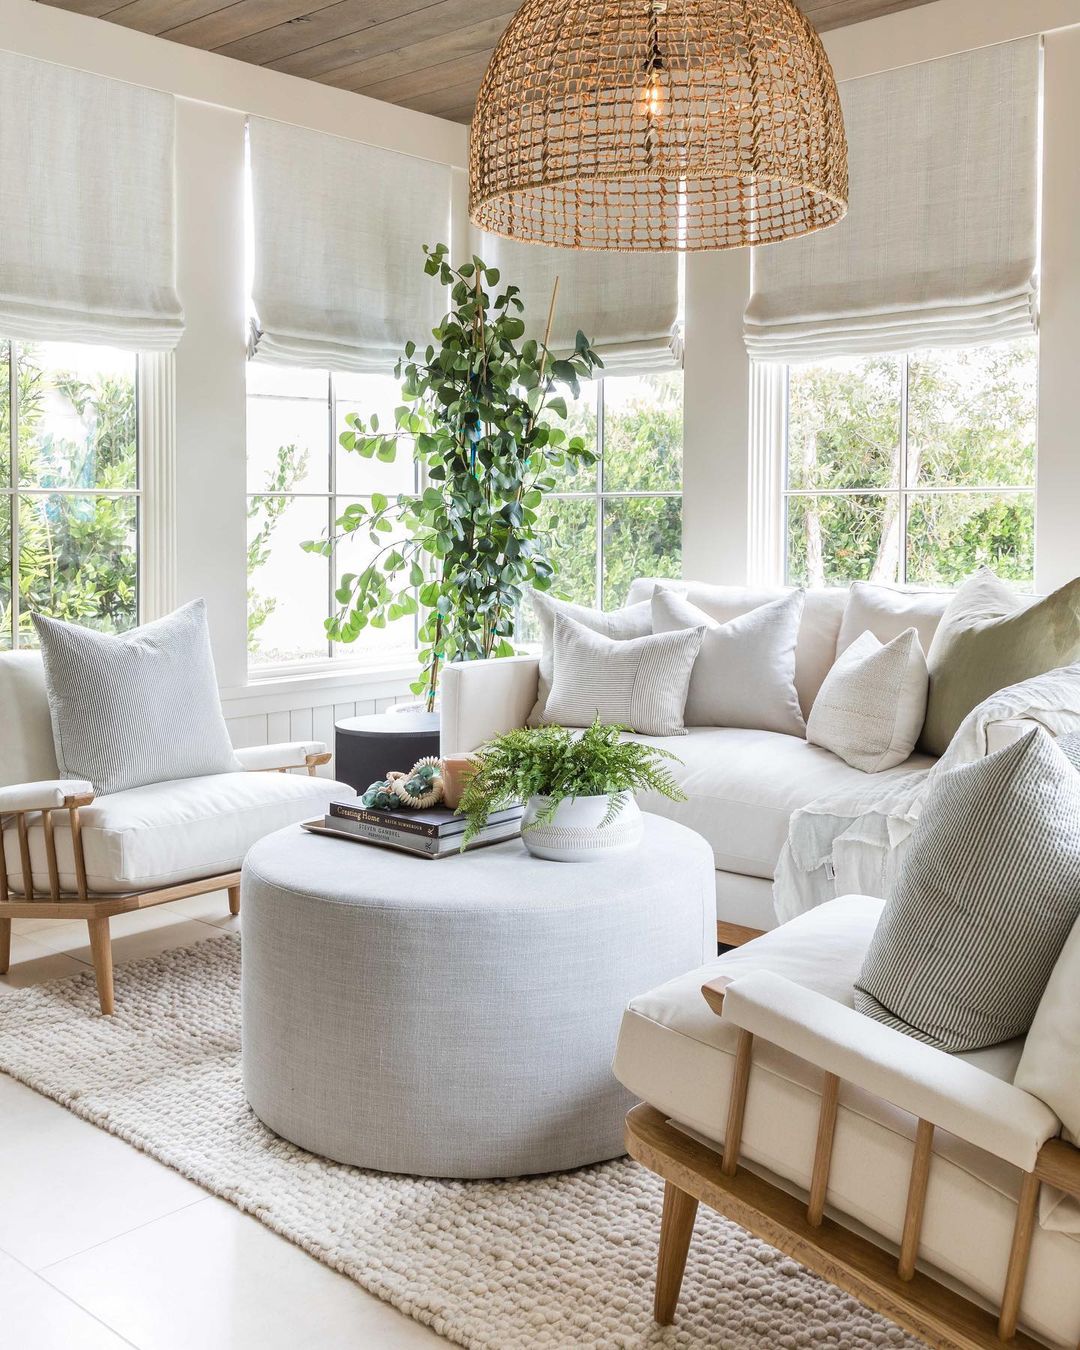 Organize Sun Room with Clean Lines and White and Gray Decor. Photo by Instagram user @puresaltinteriors